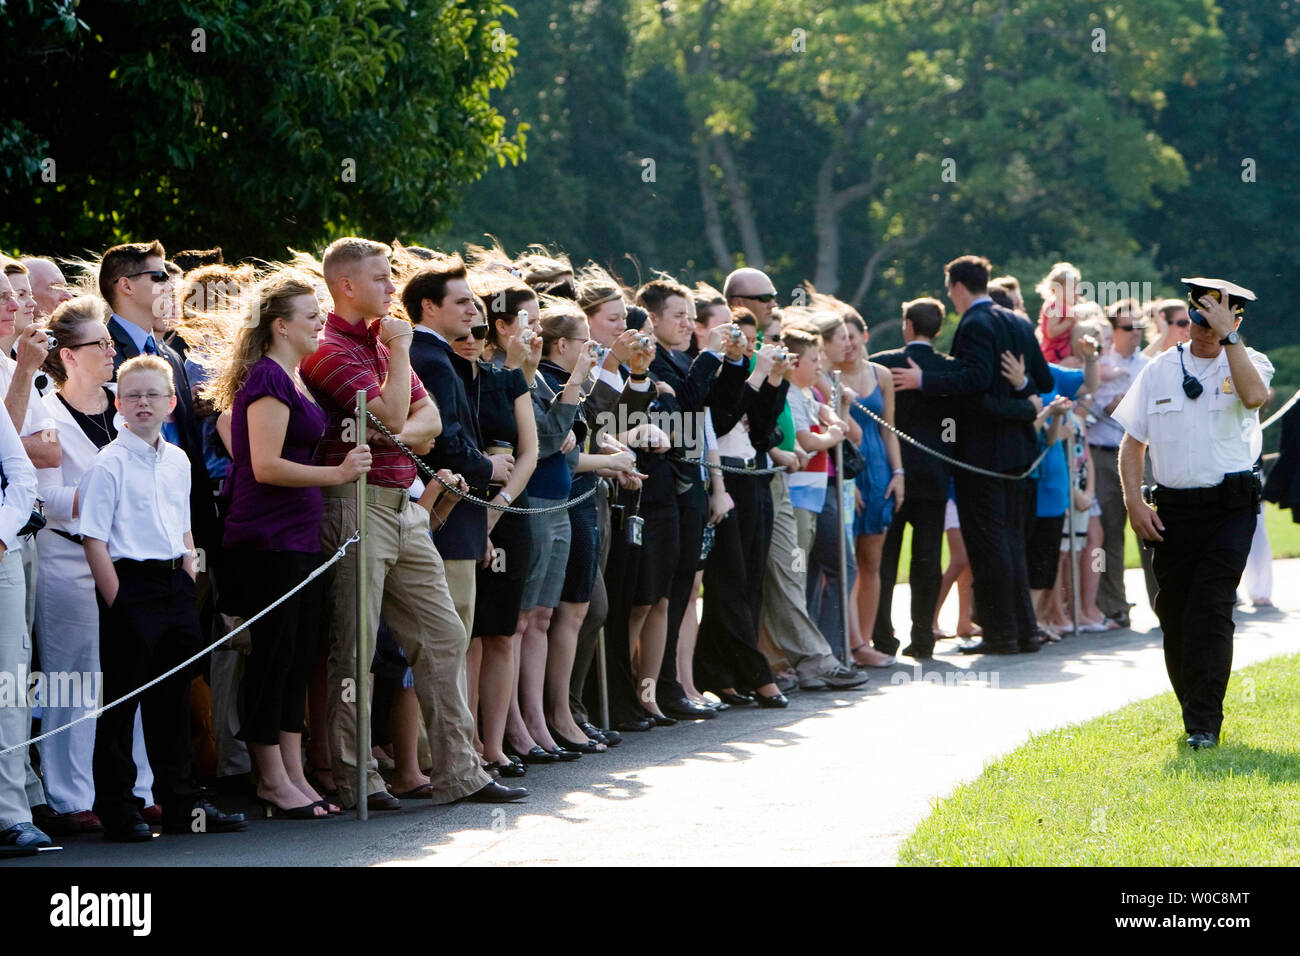 Members of the public watch as Marine One, carrying U.S. President George W. Bush, takes off from the South Lawn of the White House in Washington on August 15, 2008. President Bush is traveling to his ranch in Crawford, Texas. (UPI Photo/Patrick D. McDermott) Stock Photo